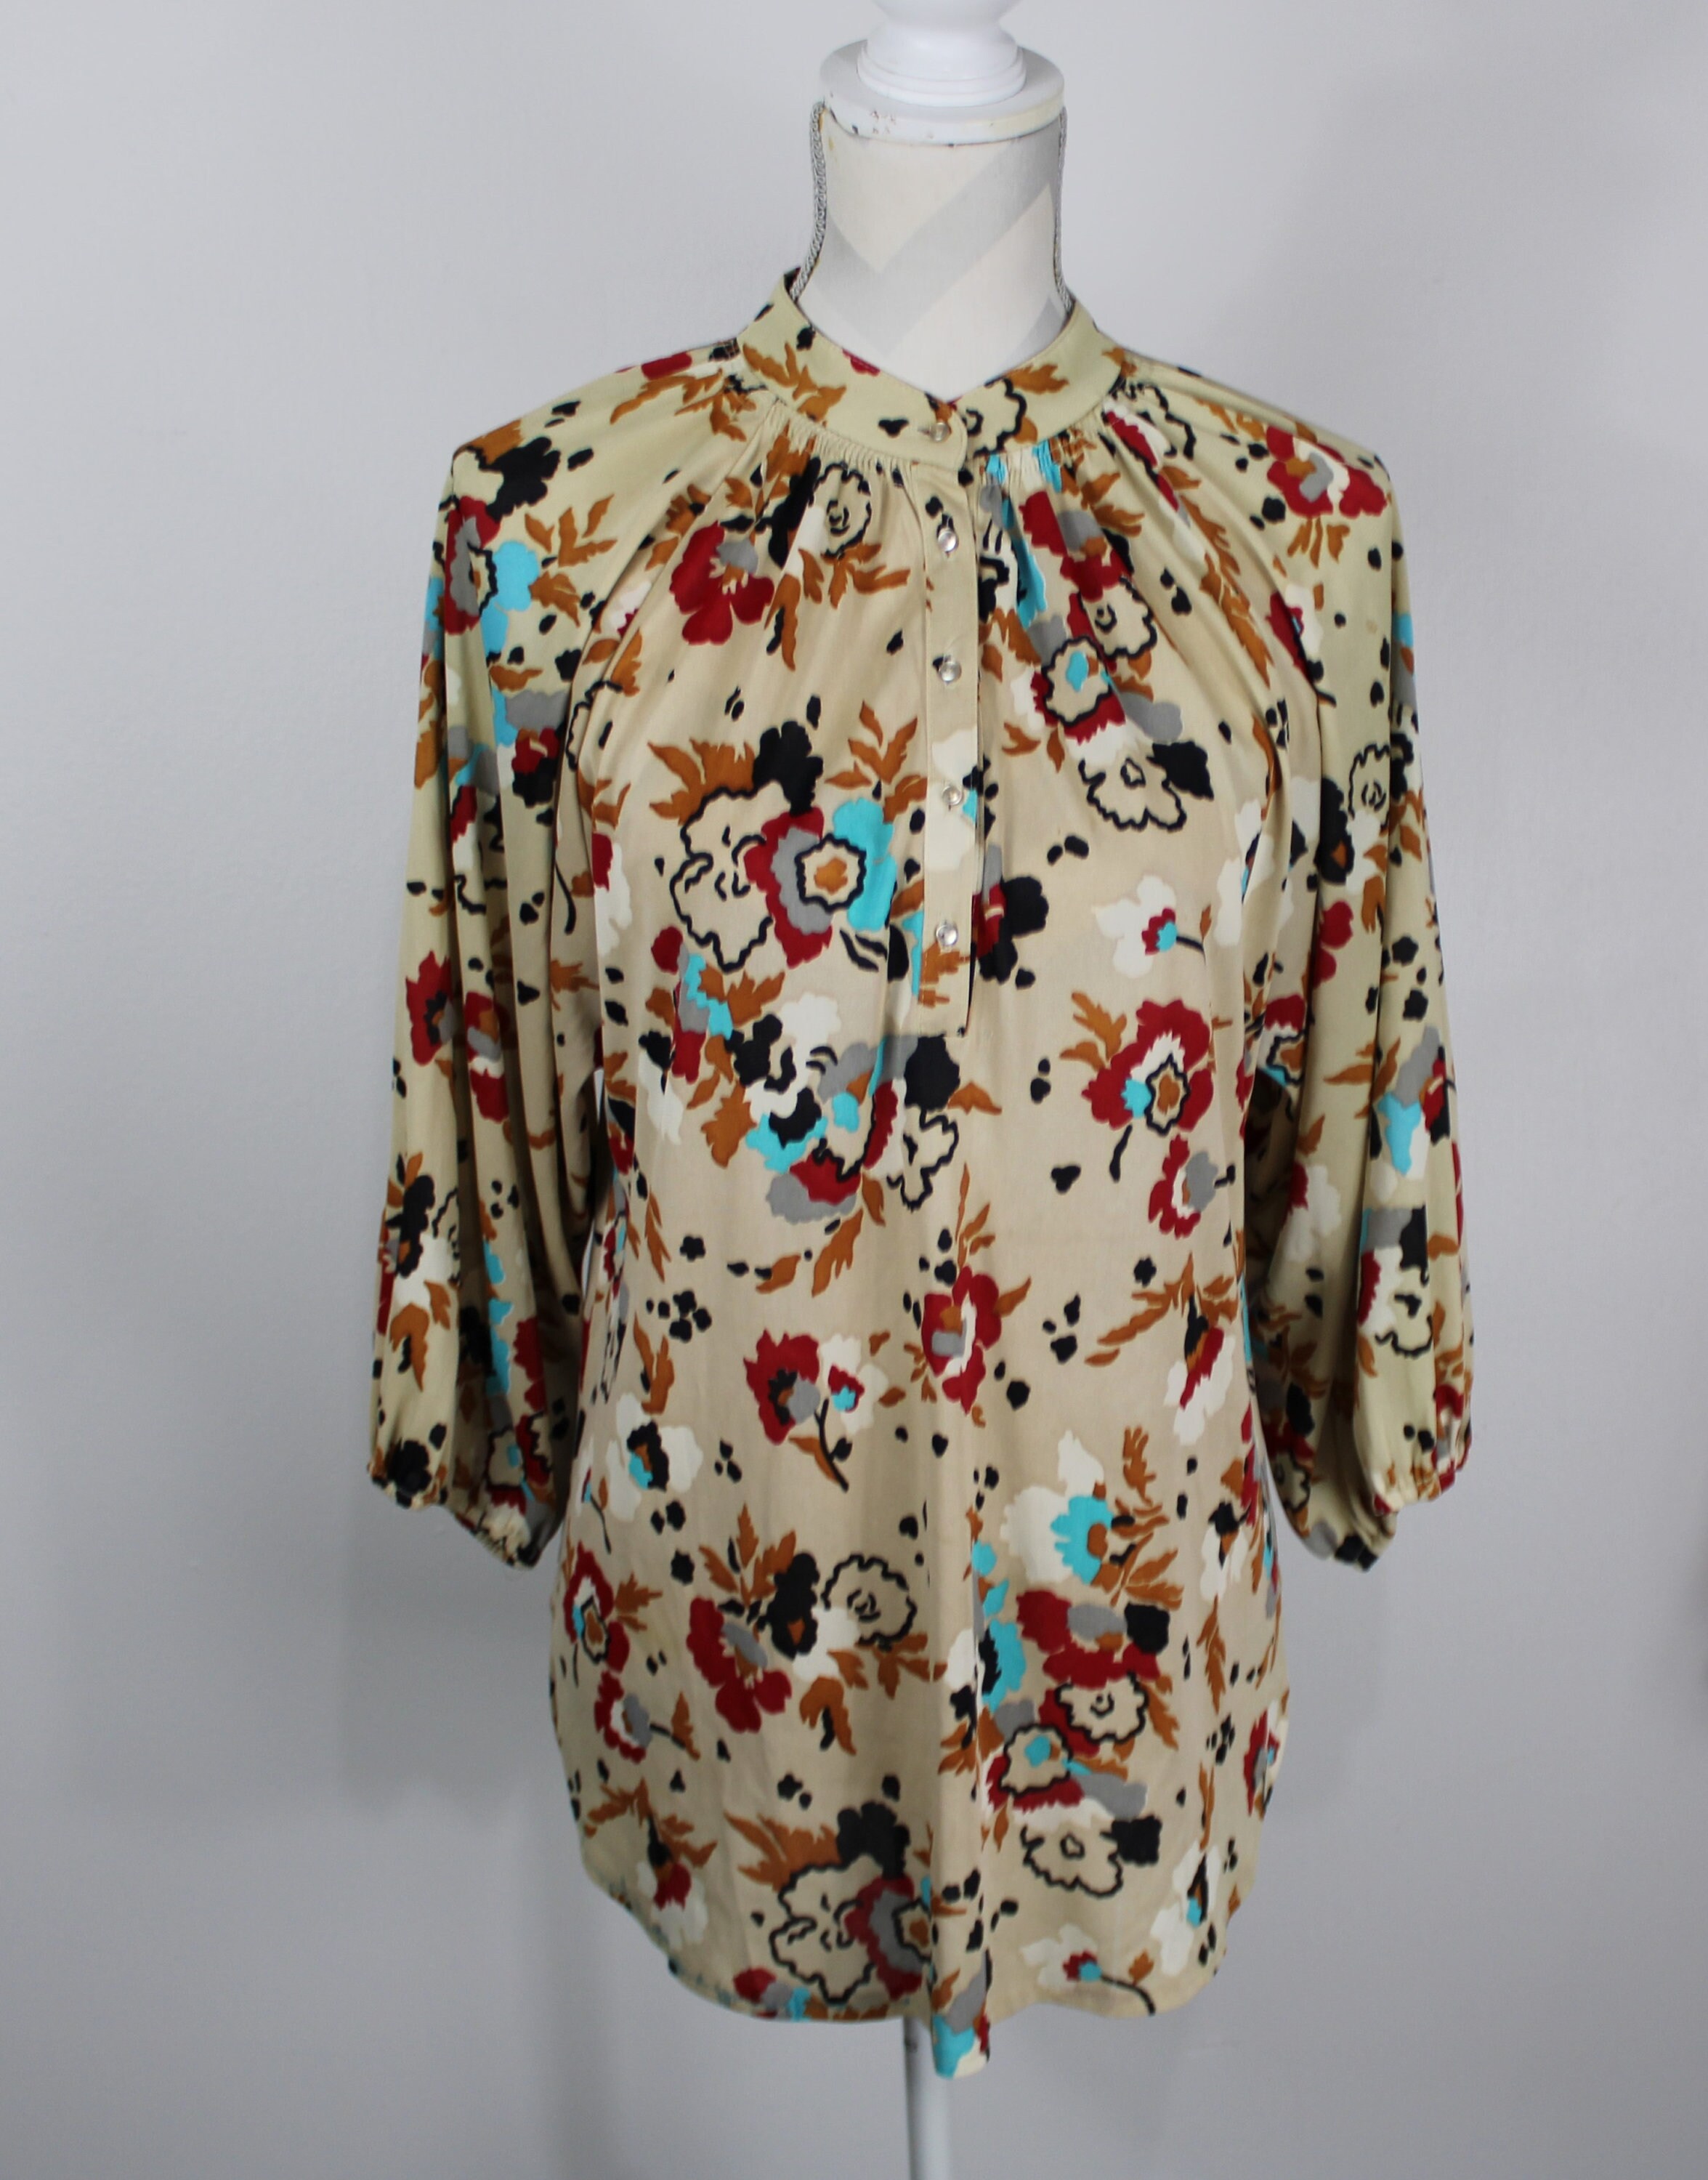 Vintage 1960's/70's Top by Sears - Etsy